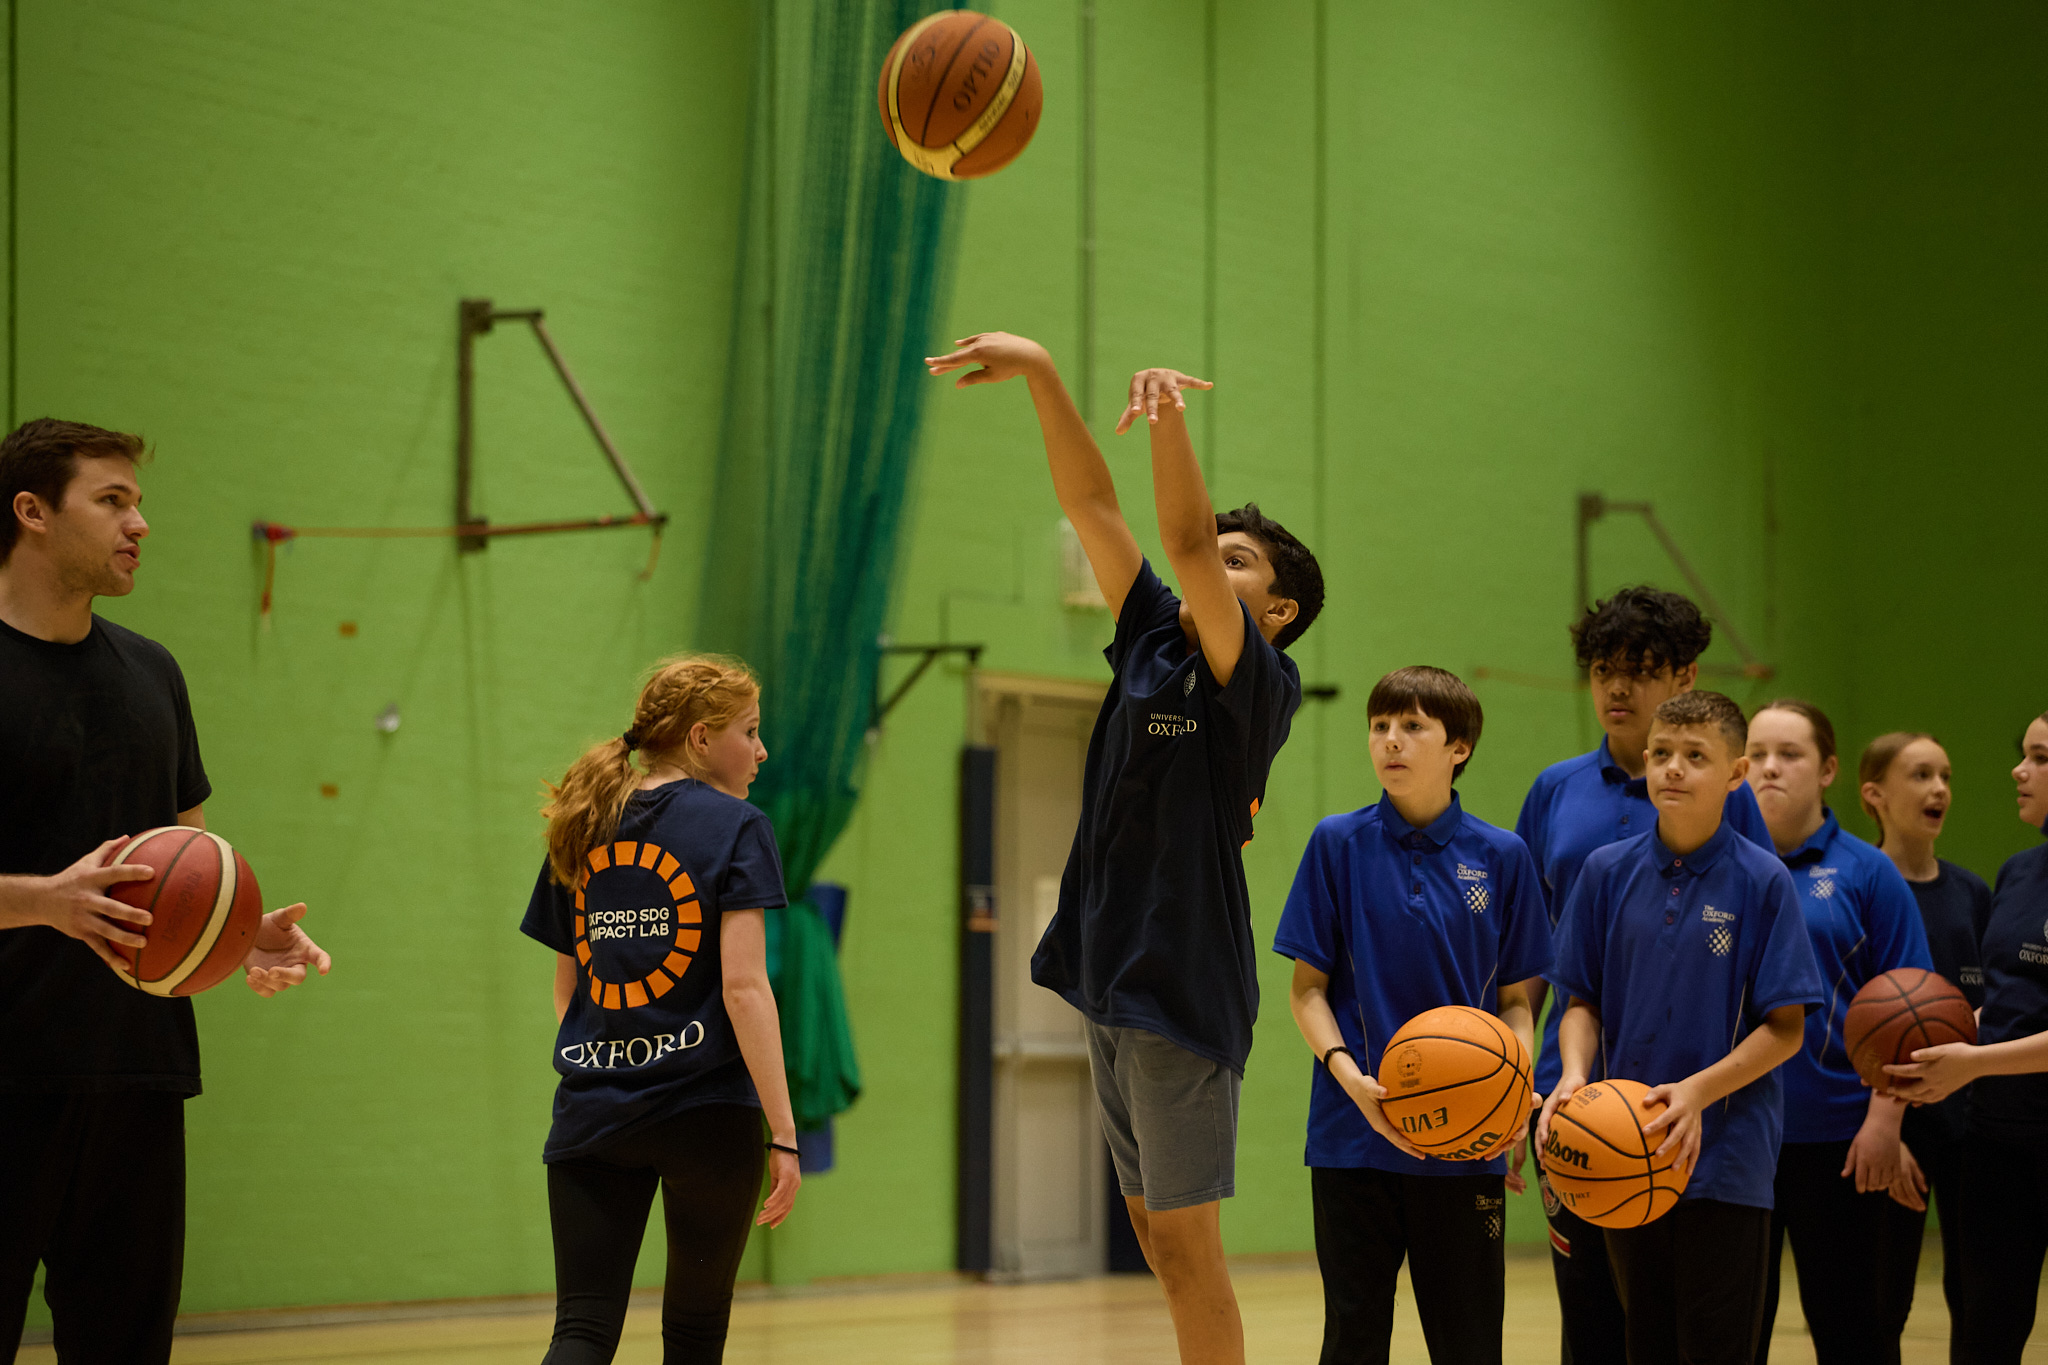 Pupils lining up to practice shooting hoops in a hall